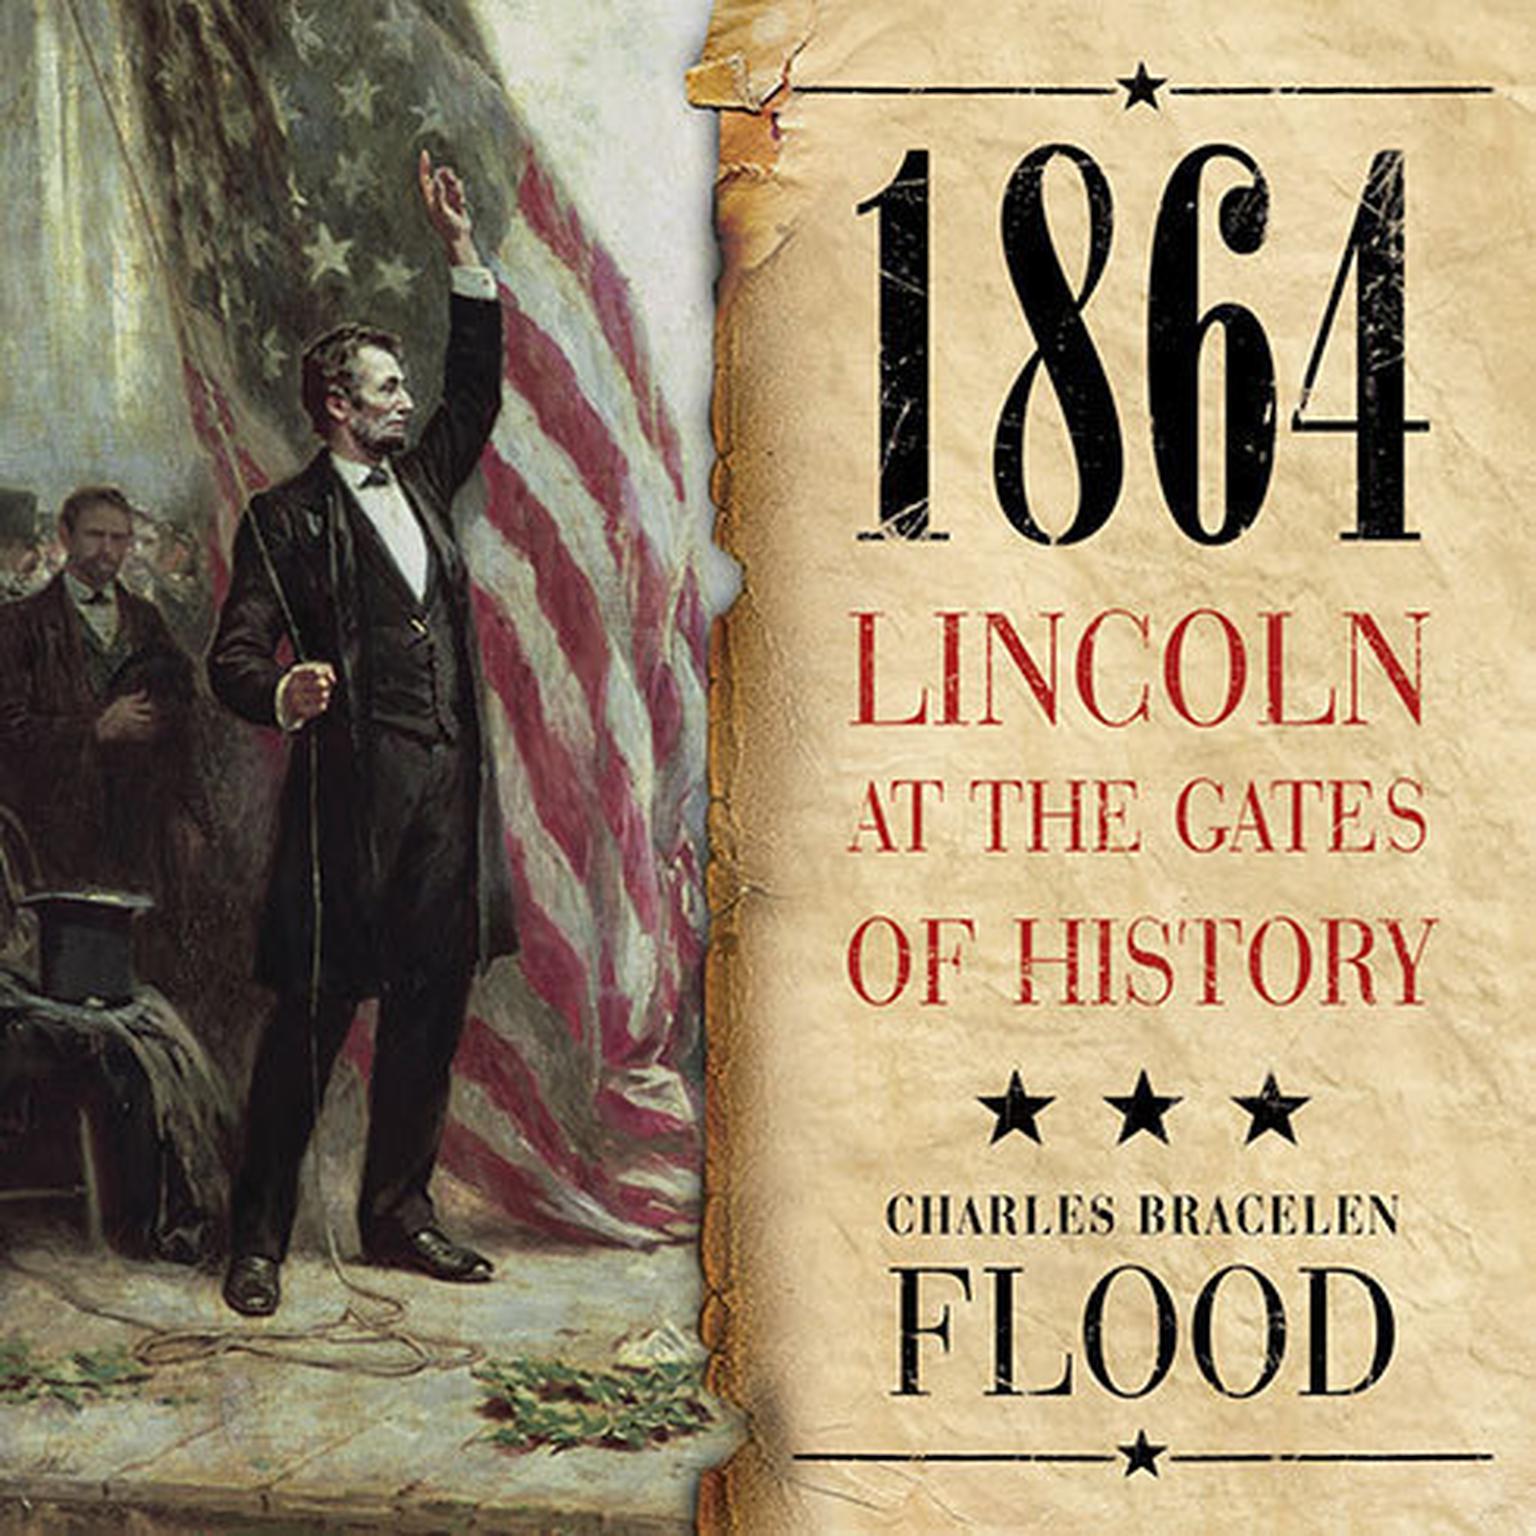 1864: Lincoln at the Gates of History Audiobook, by Charles Bracelen Flood